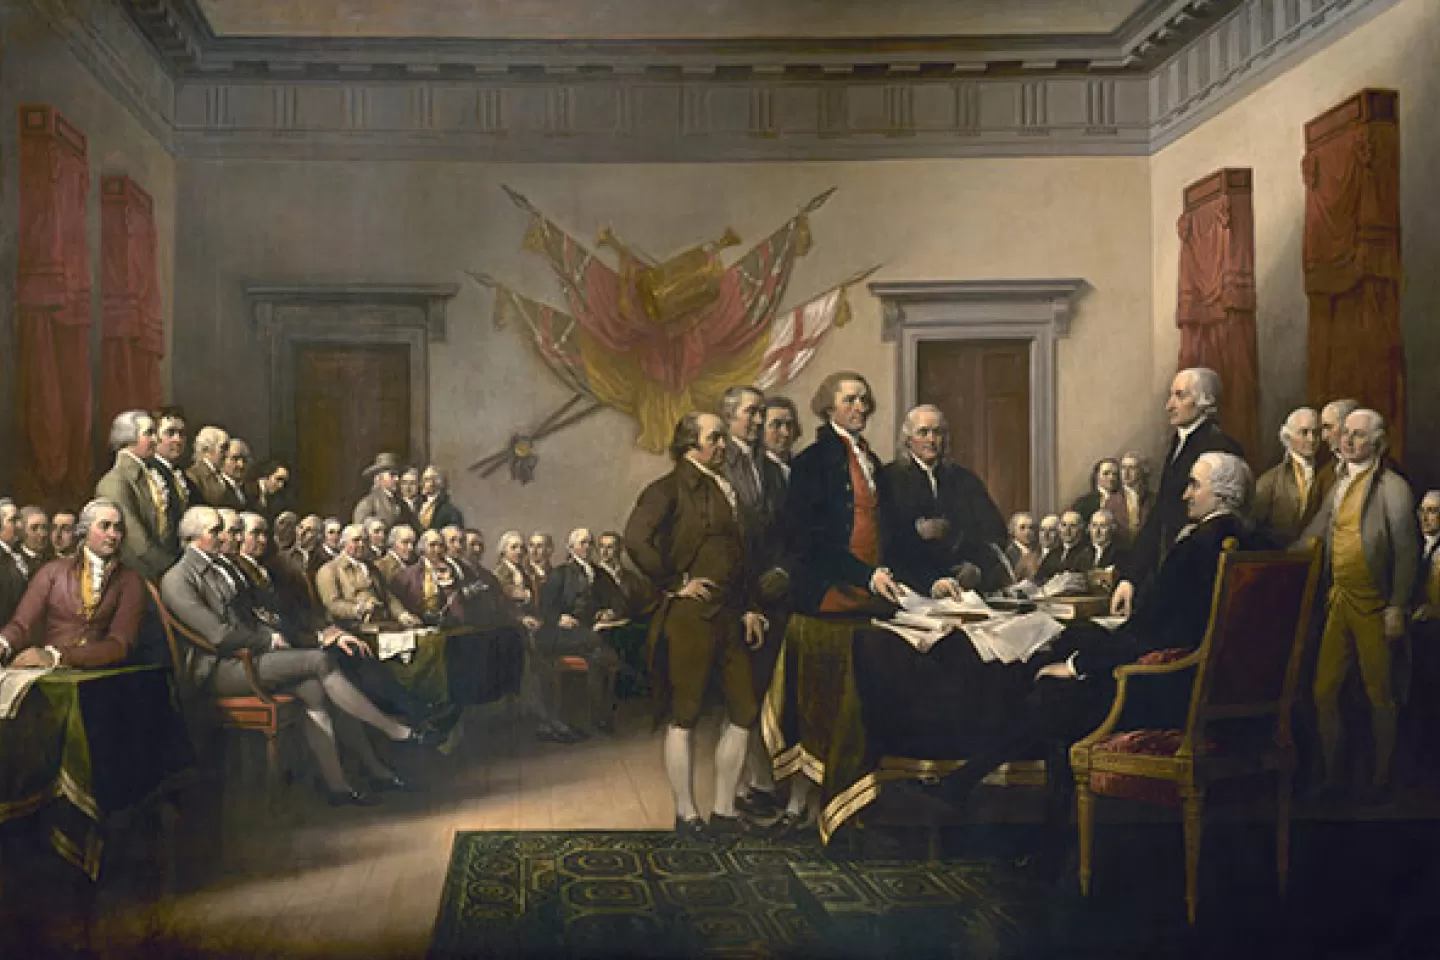 Trumbull's painting of the signing of the Declaration of Independence. Many men in suits stand in an office gathered around a desk. 